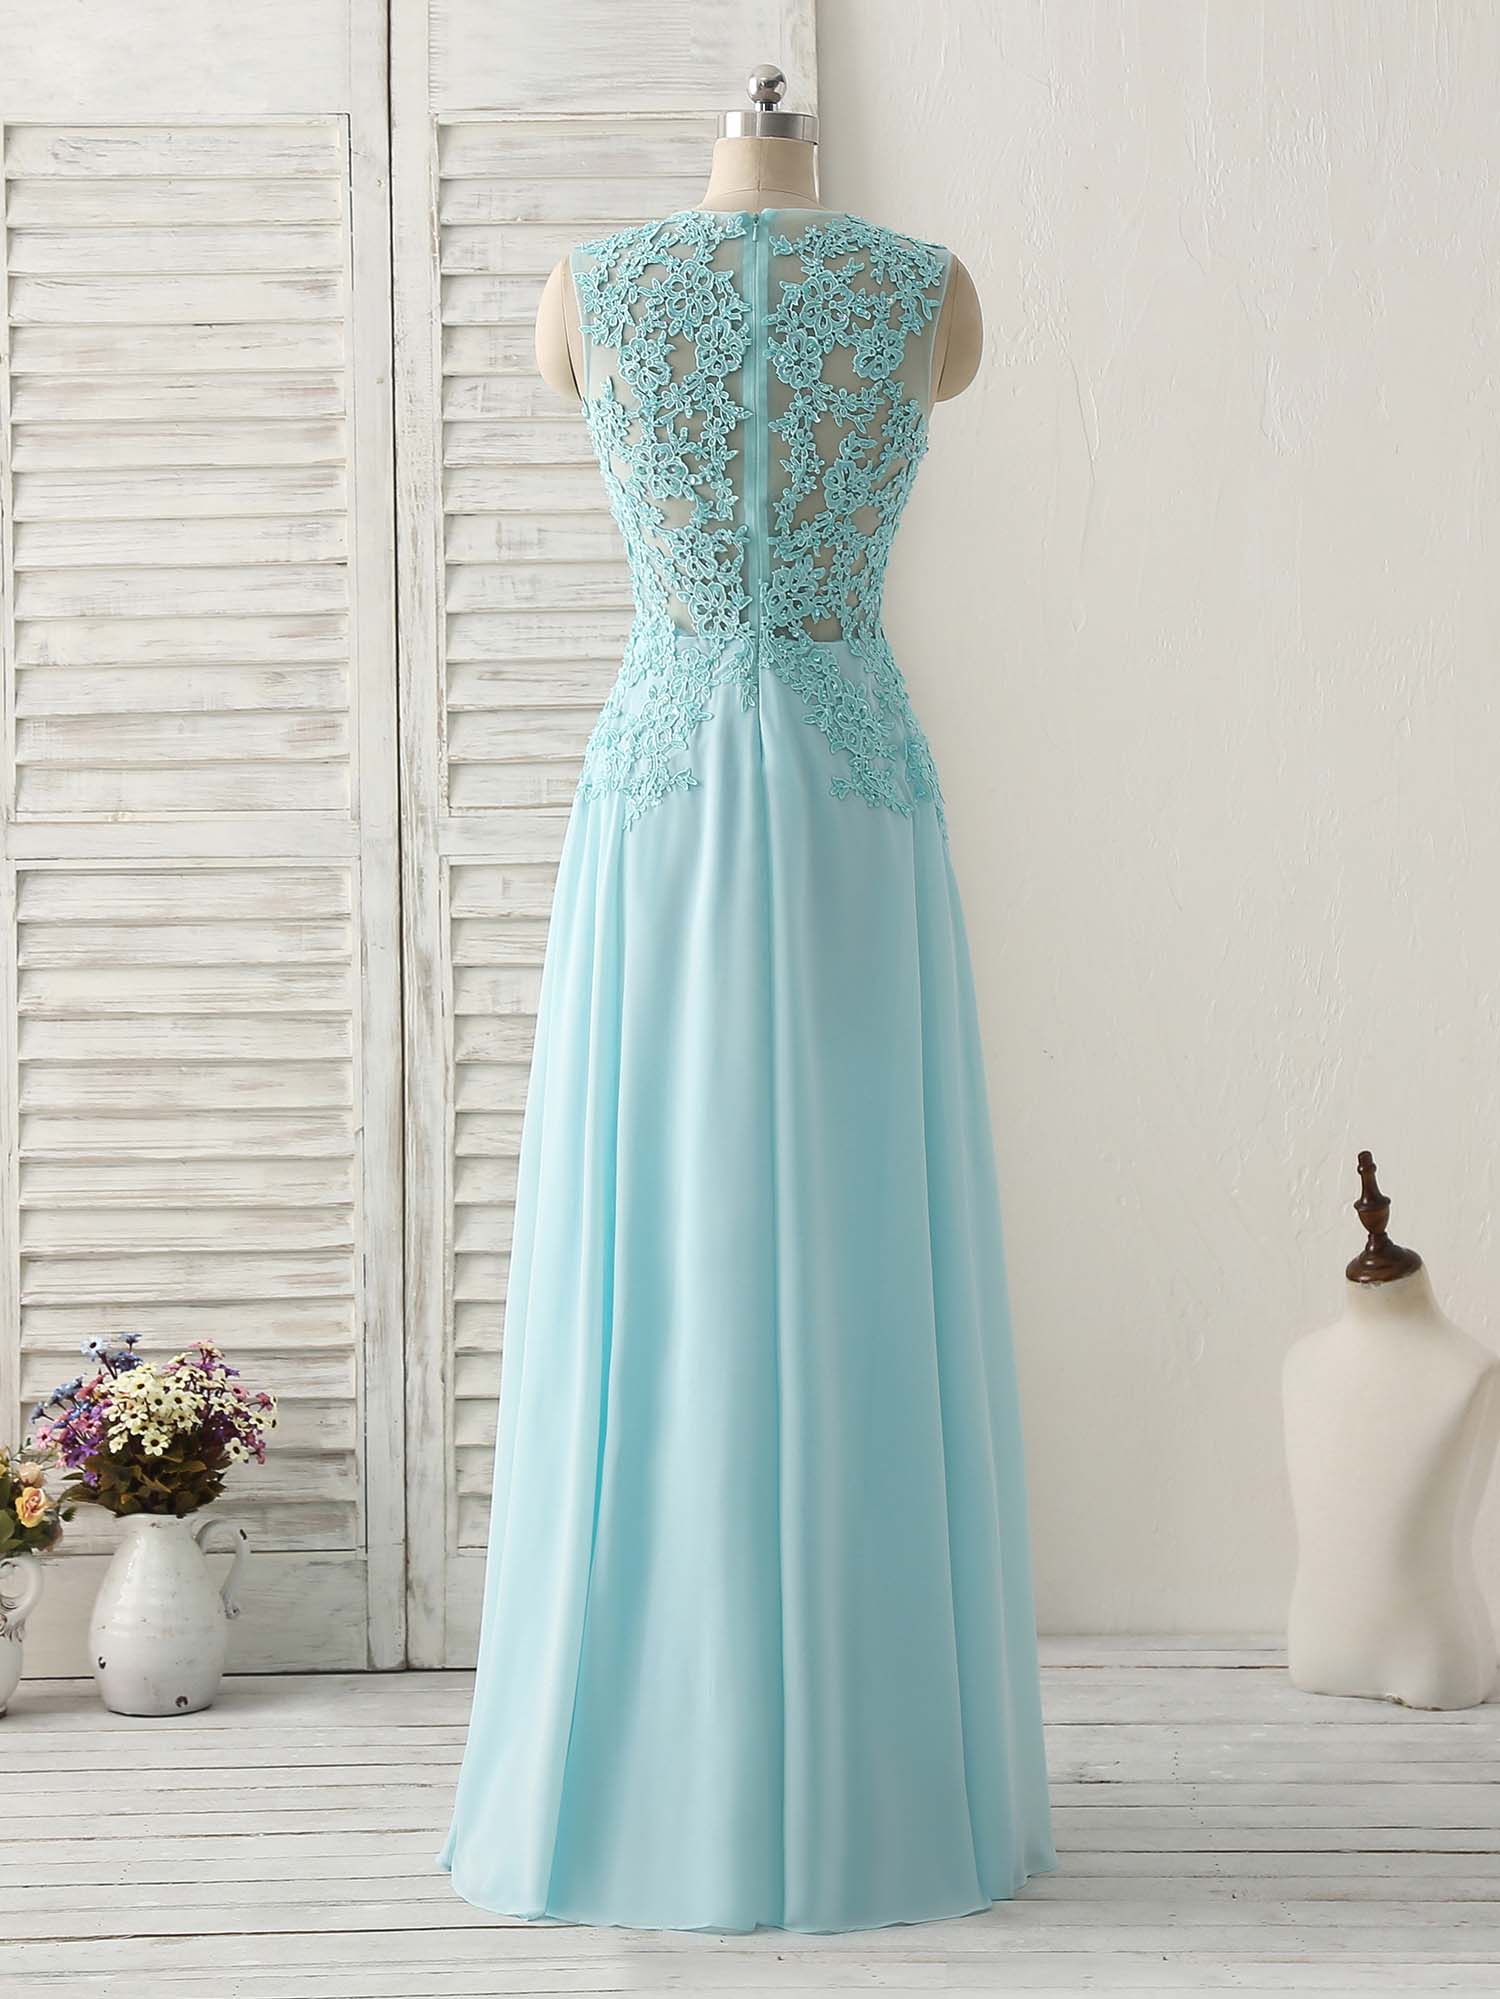 Party Dress For Baby, Blue Round Neck Lace Chiffon Long Prom Dress, Blue Long Formal Dresses